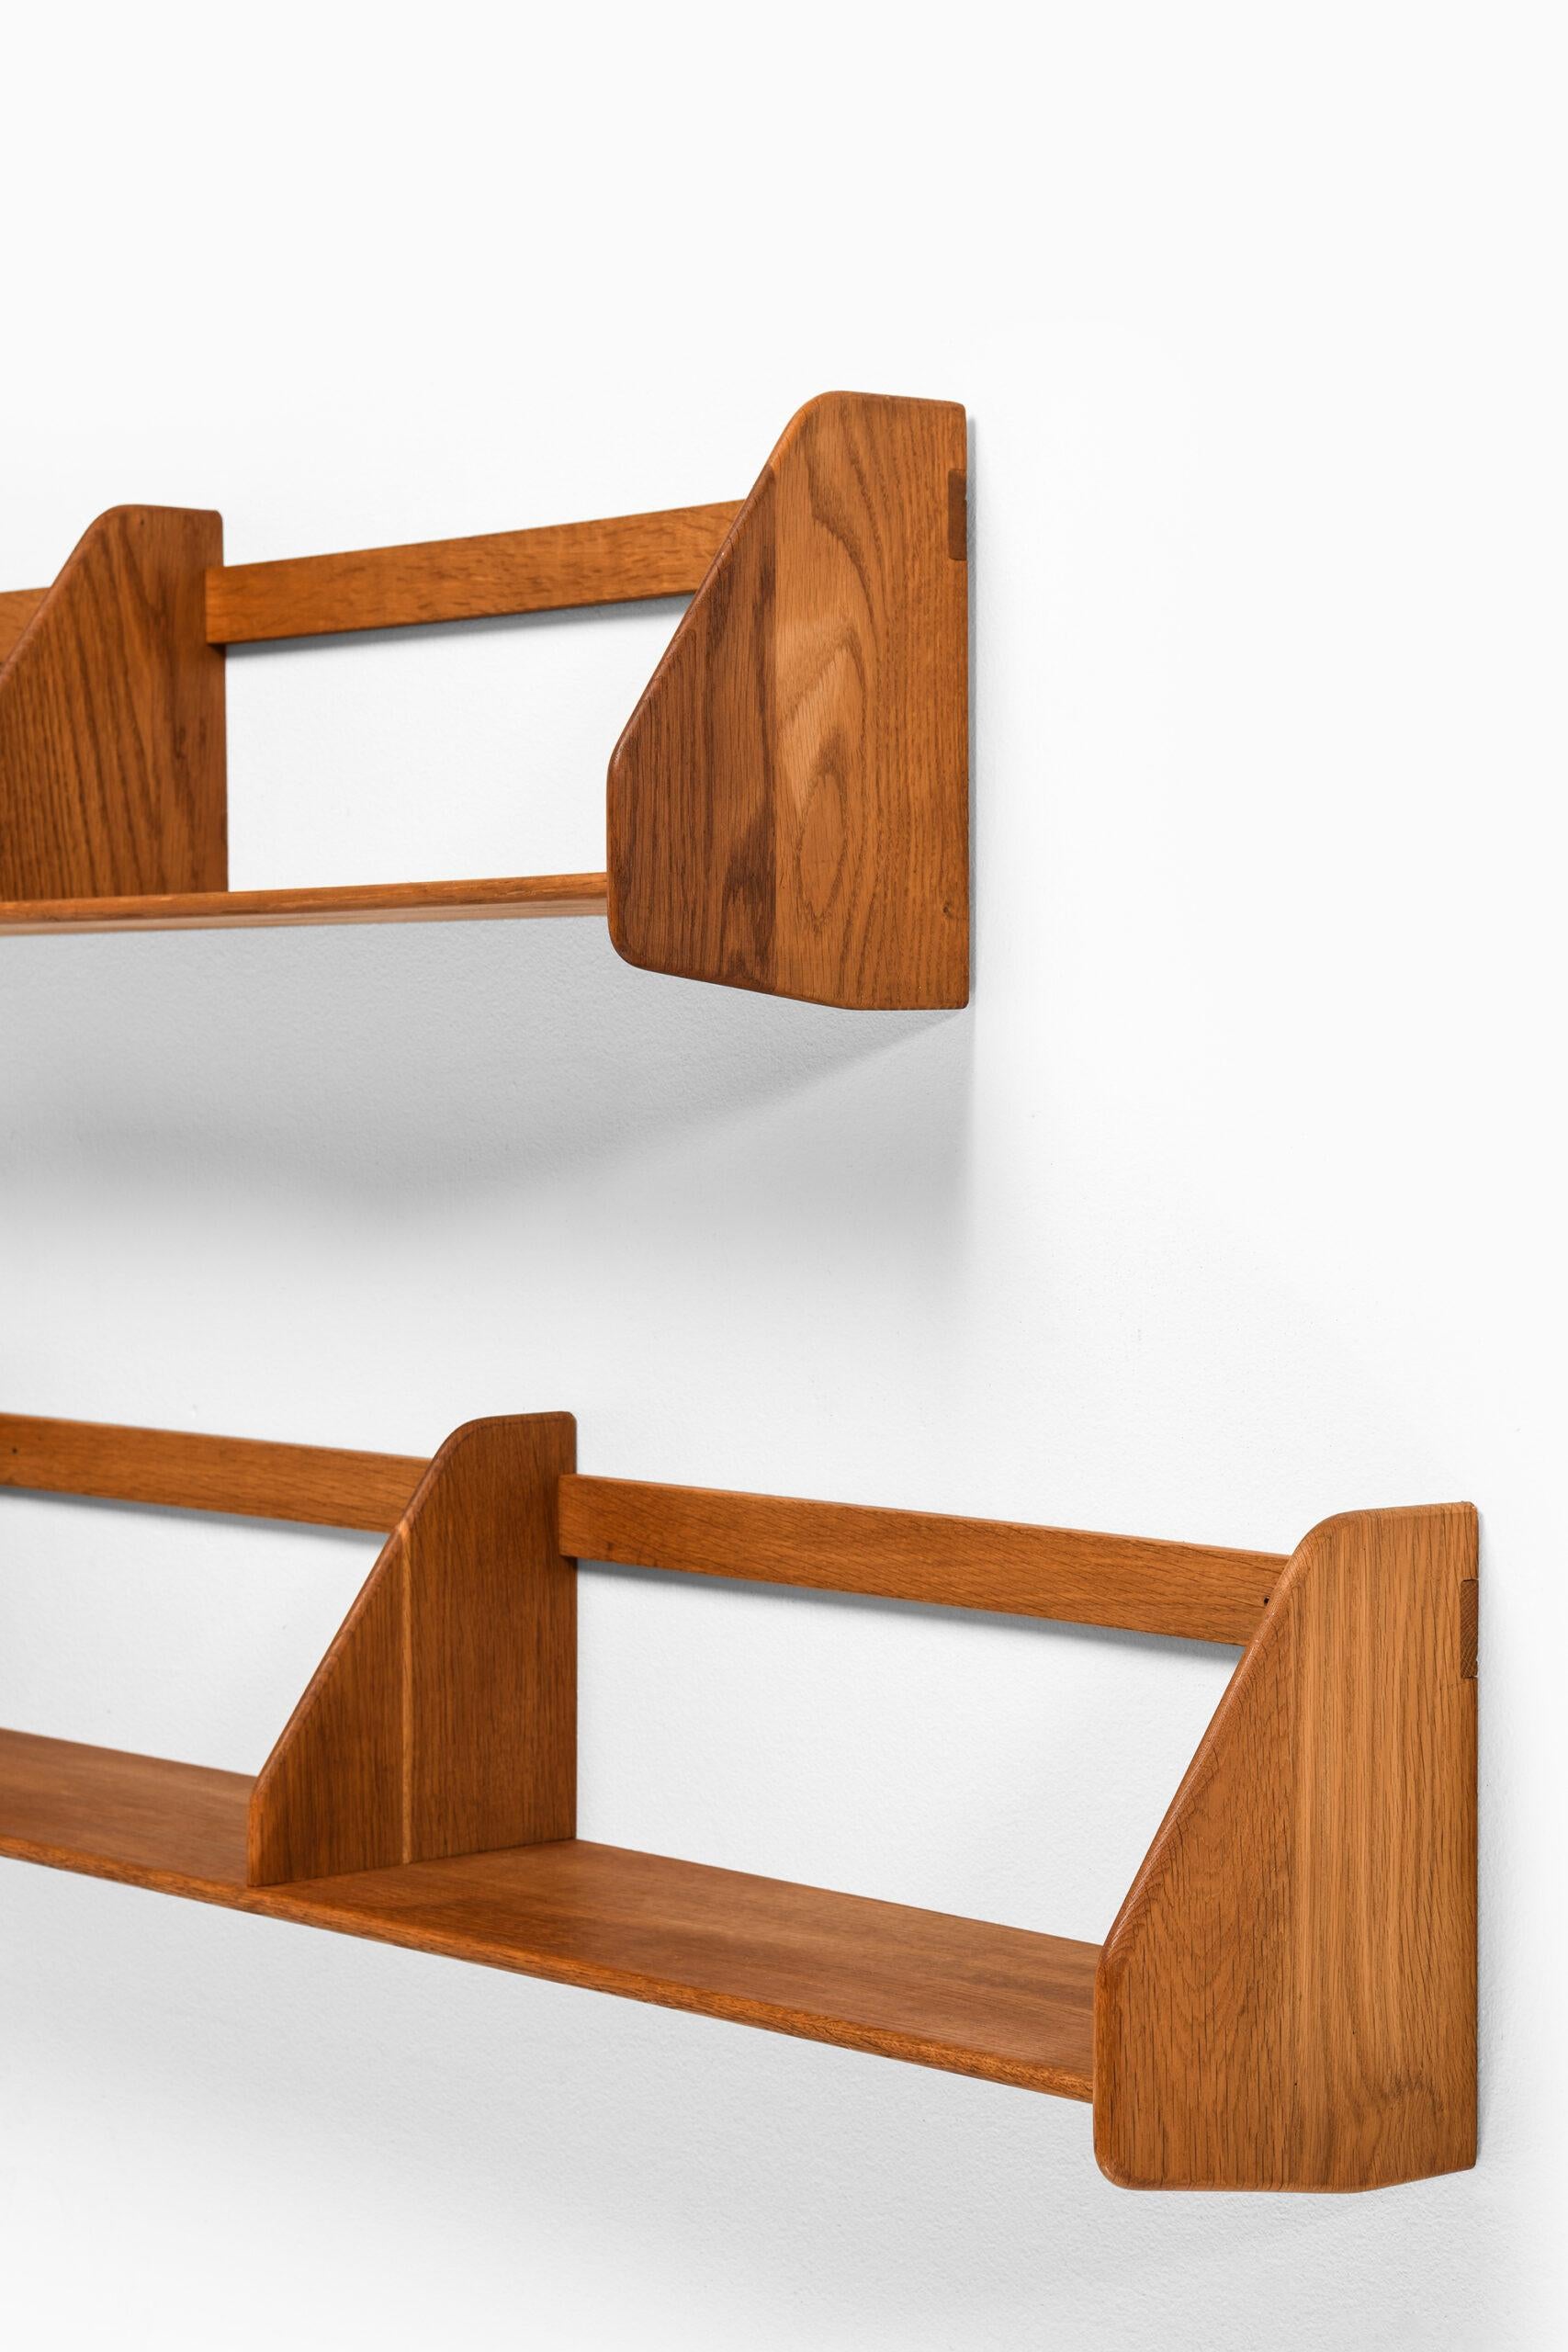 Wall mounted shelves designed by Hans Wegner. Produced by Ry Møbler in Denmark.